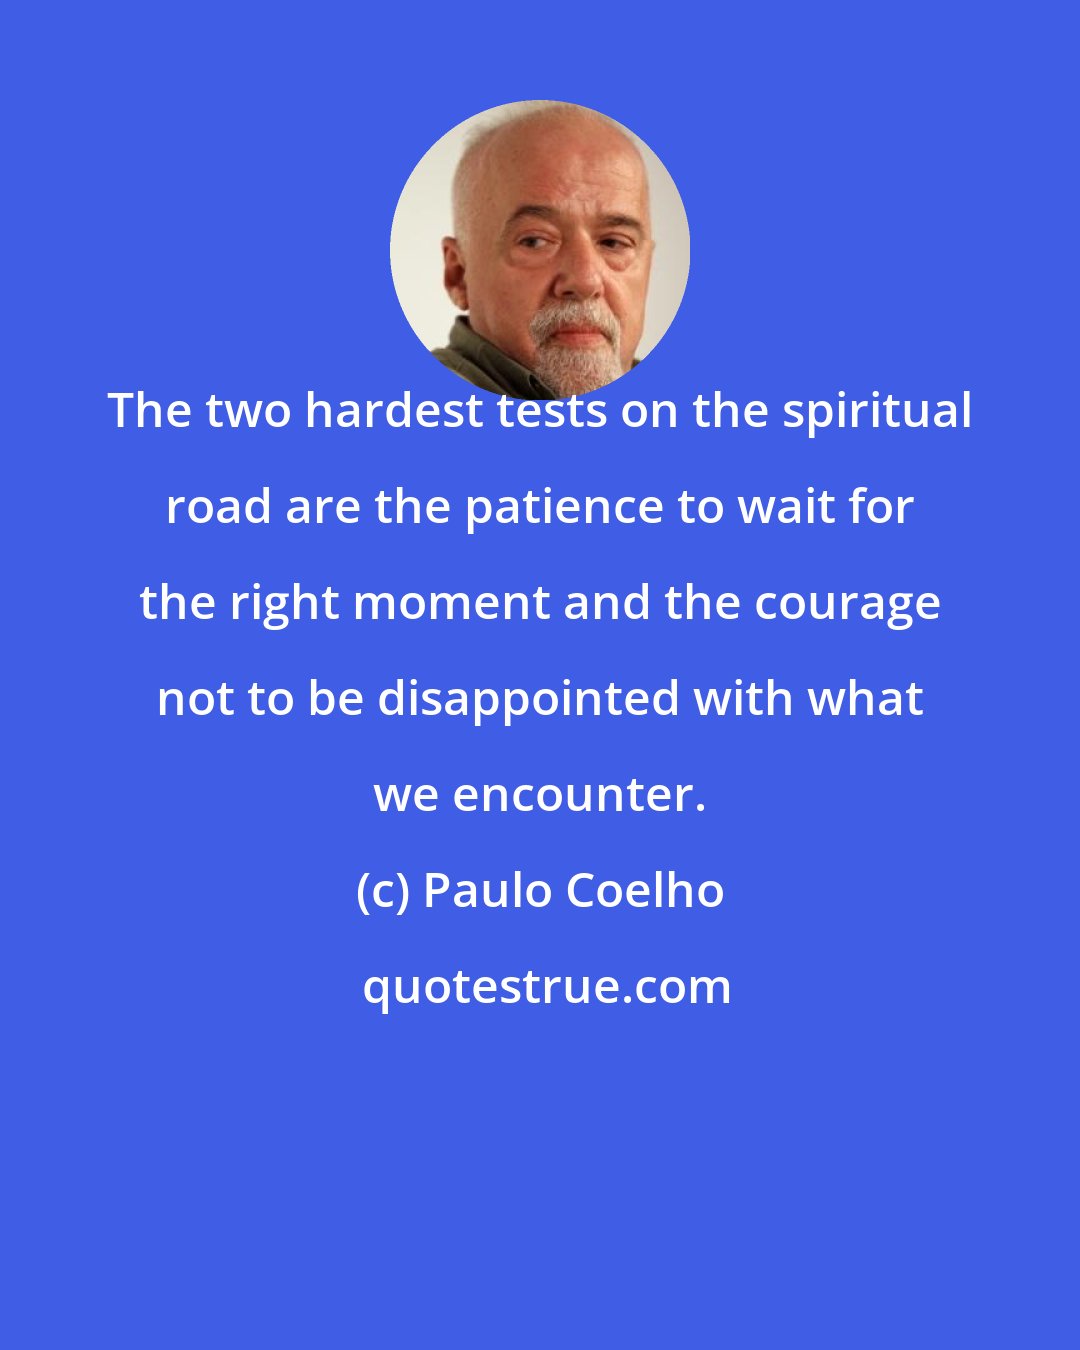 Paulo Coelho: The two hardest tests on the spiritual road are the patience to wait for the right moment and the courage not to be disappointed with what we encounter.